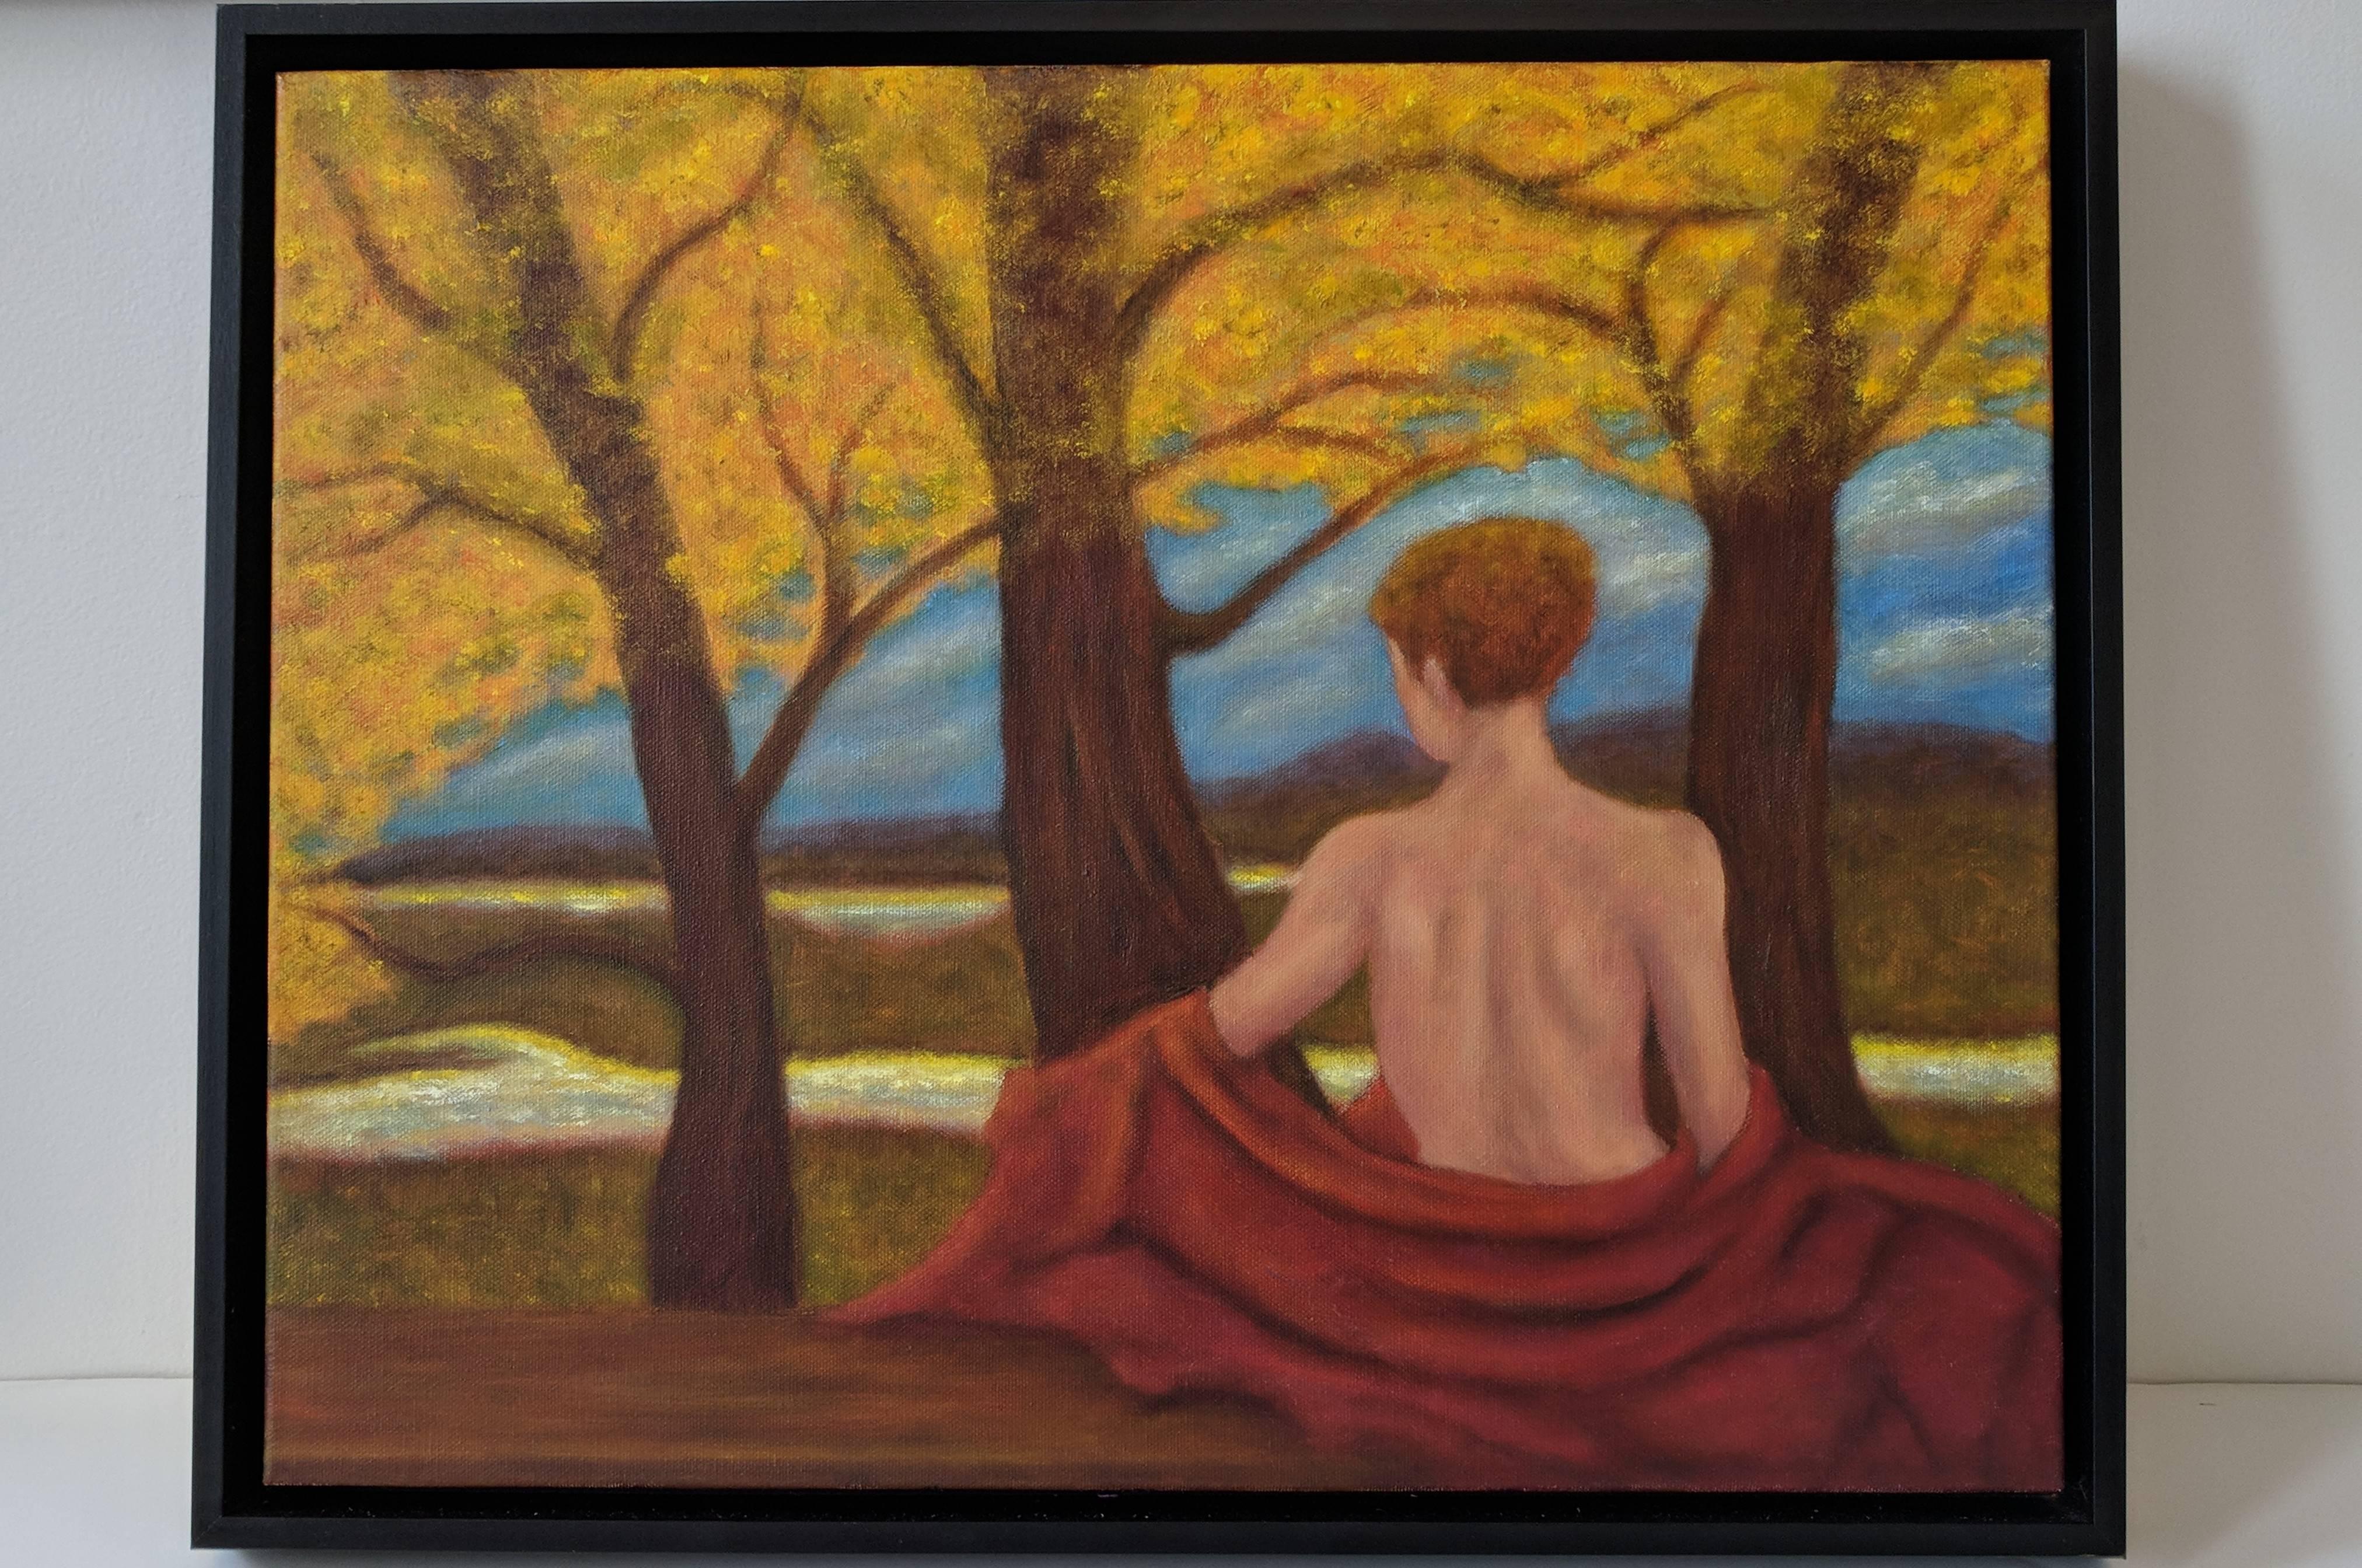 This oil on canvas features a solitary figure sitting quietly amidst the 